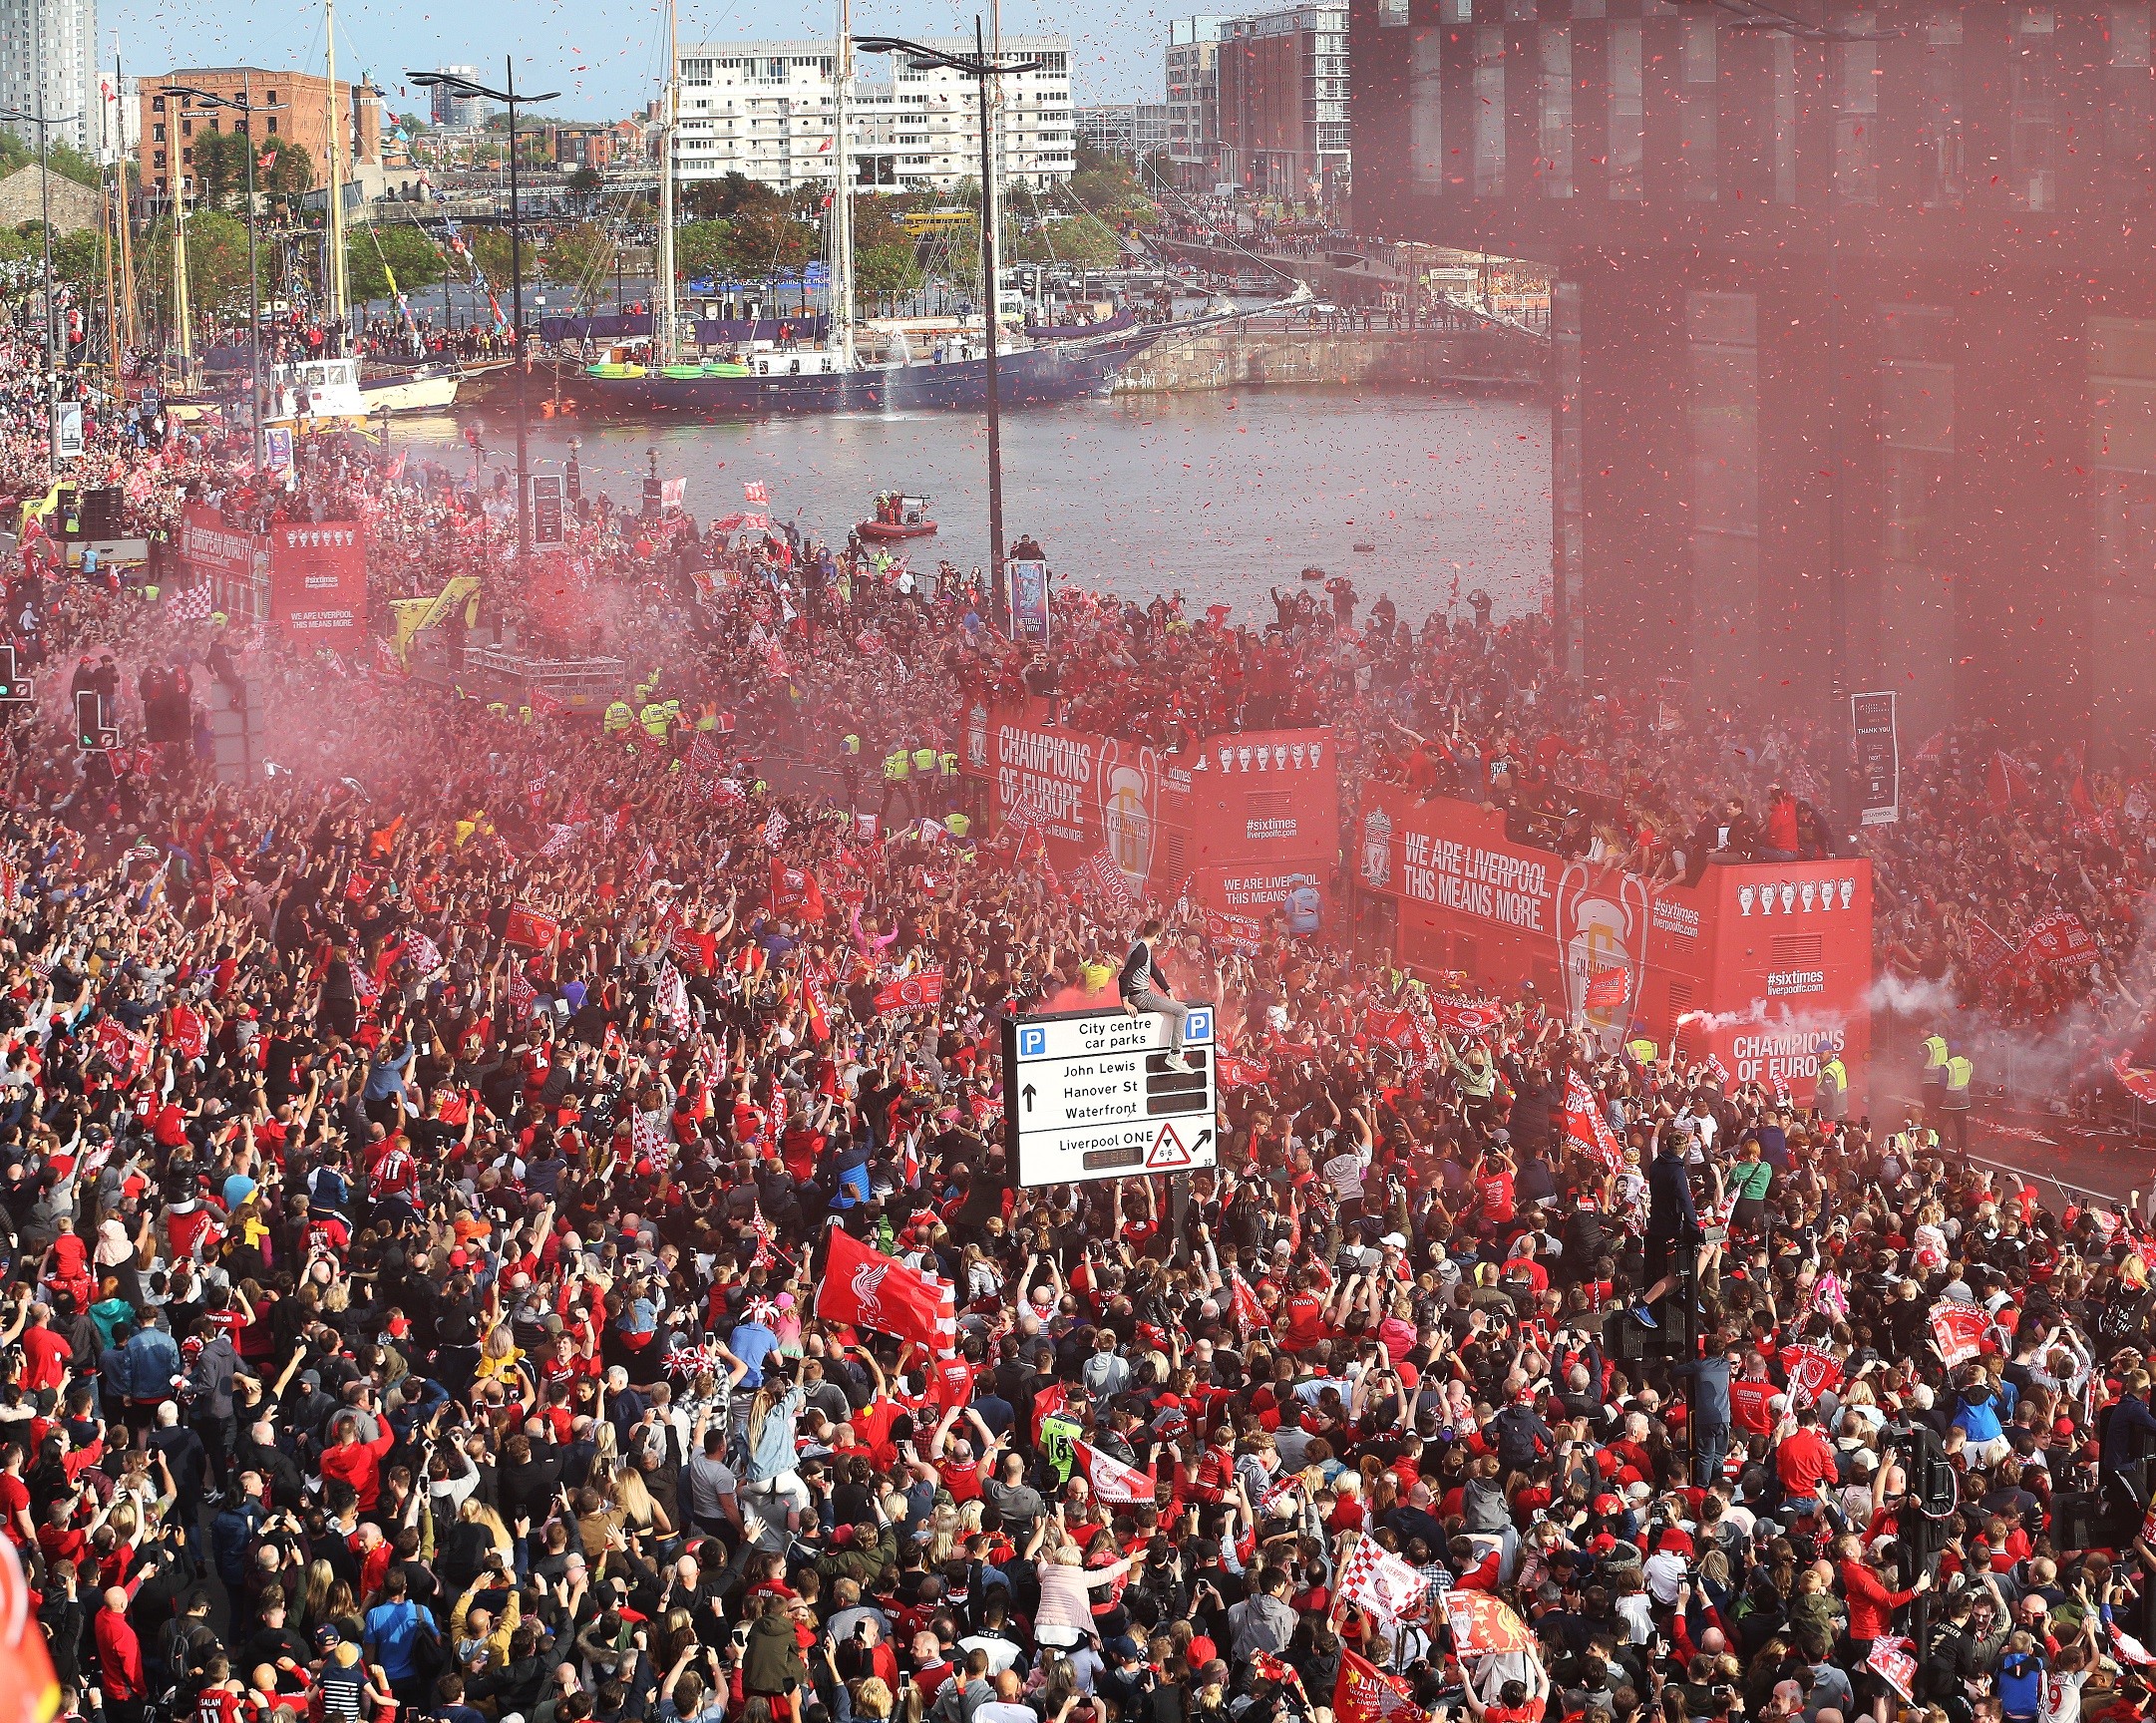 LFC parade from 2019 showing red flare smoke over crowds following two red LFC buses in liverpool city centre